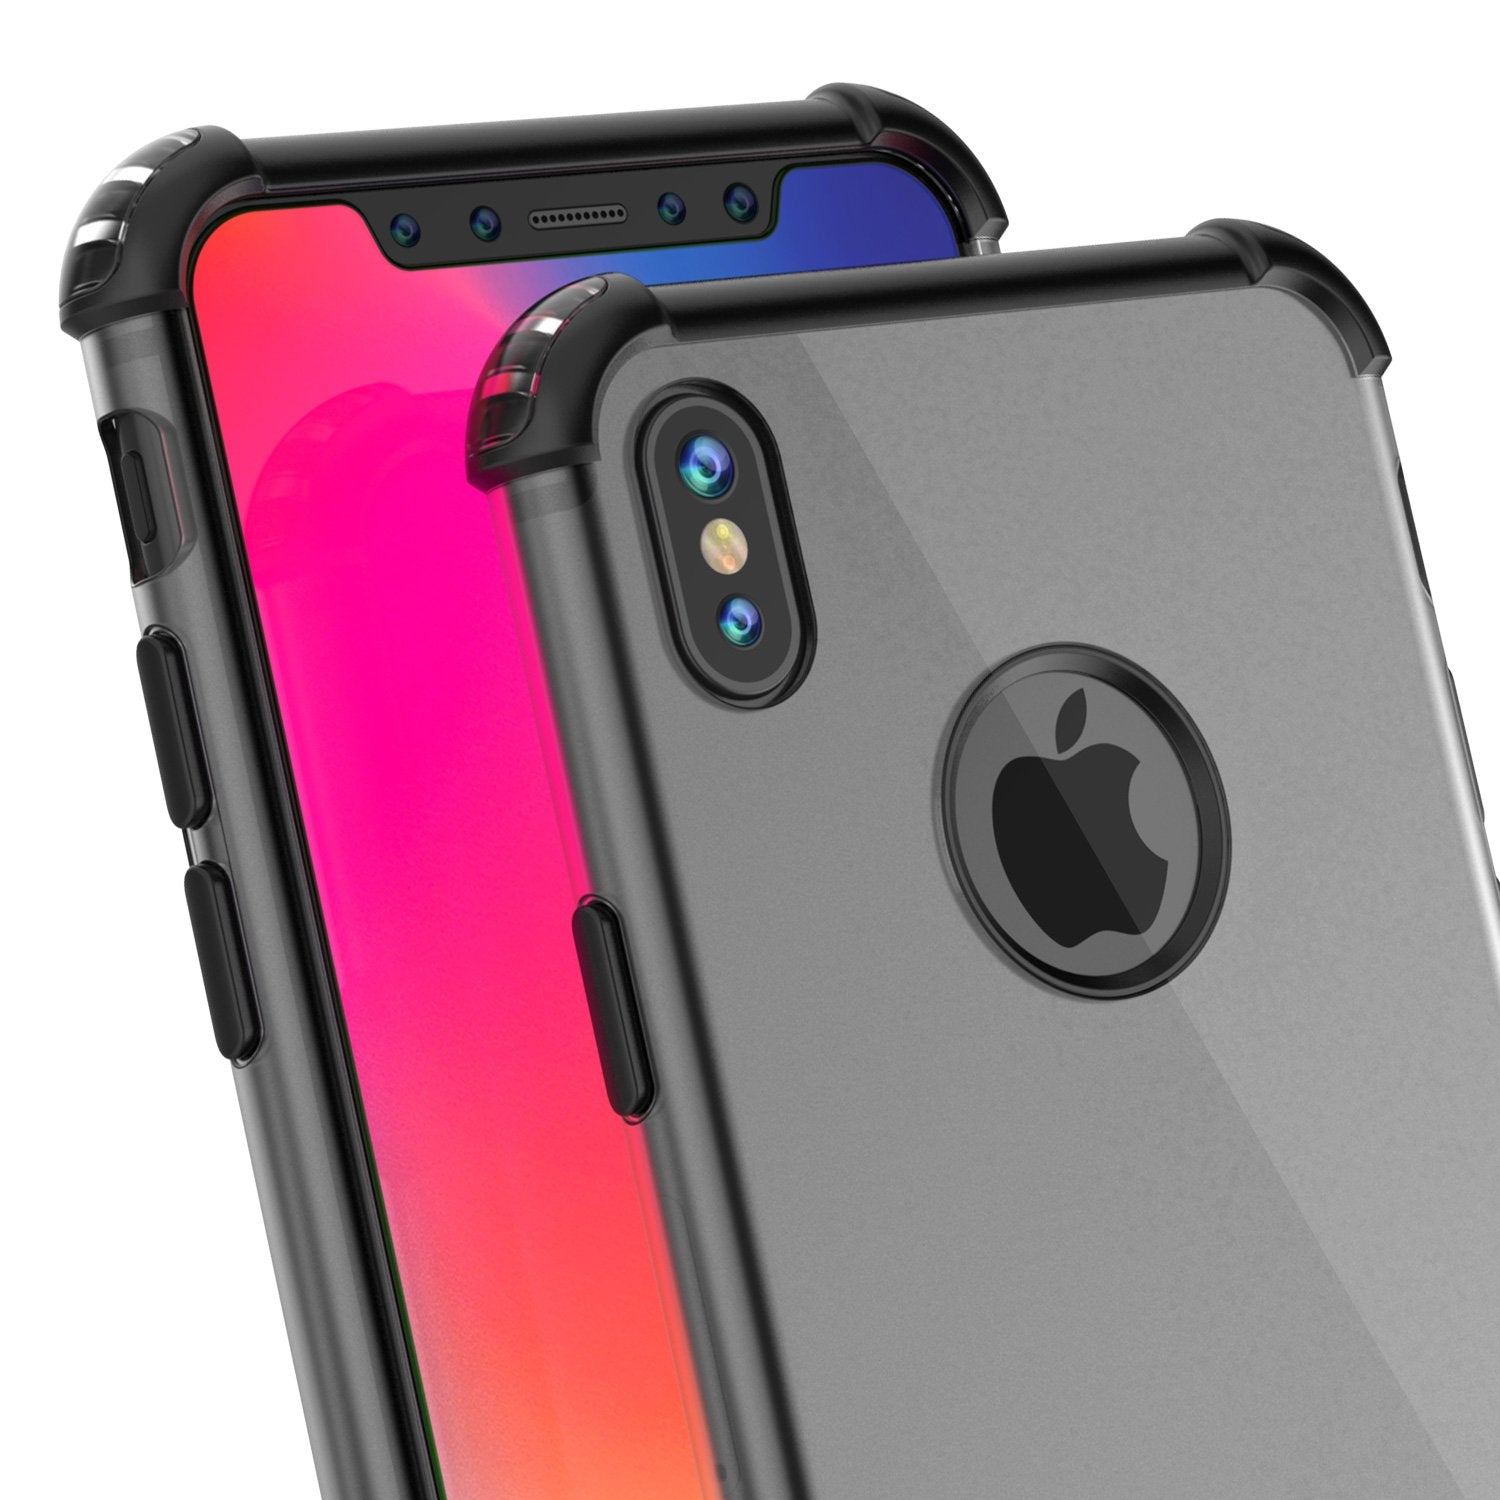 iPhone X Case, Punkcase BLAZE Black Series Protective Cover W/ PunkShield Screen Protector